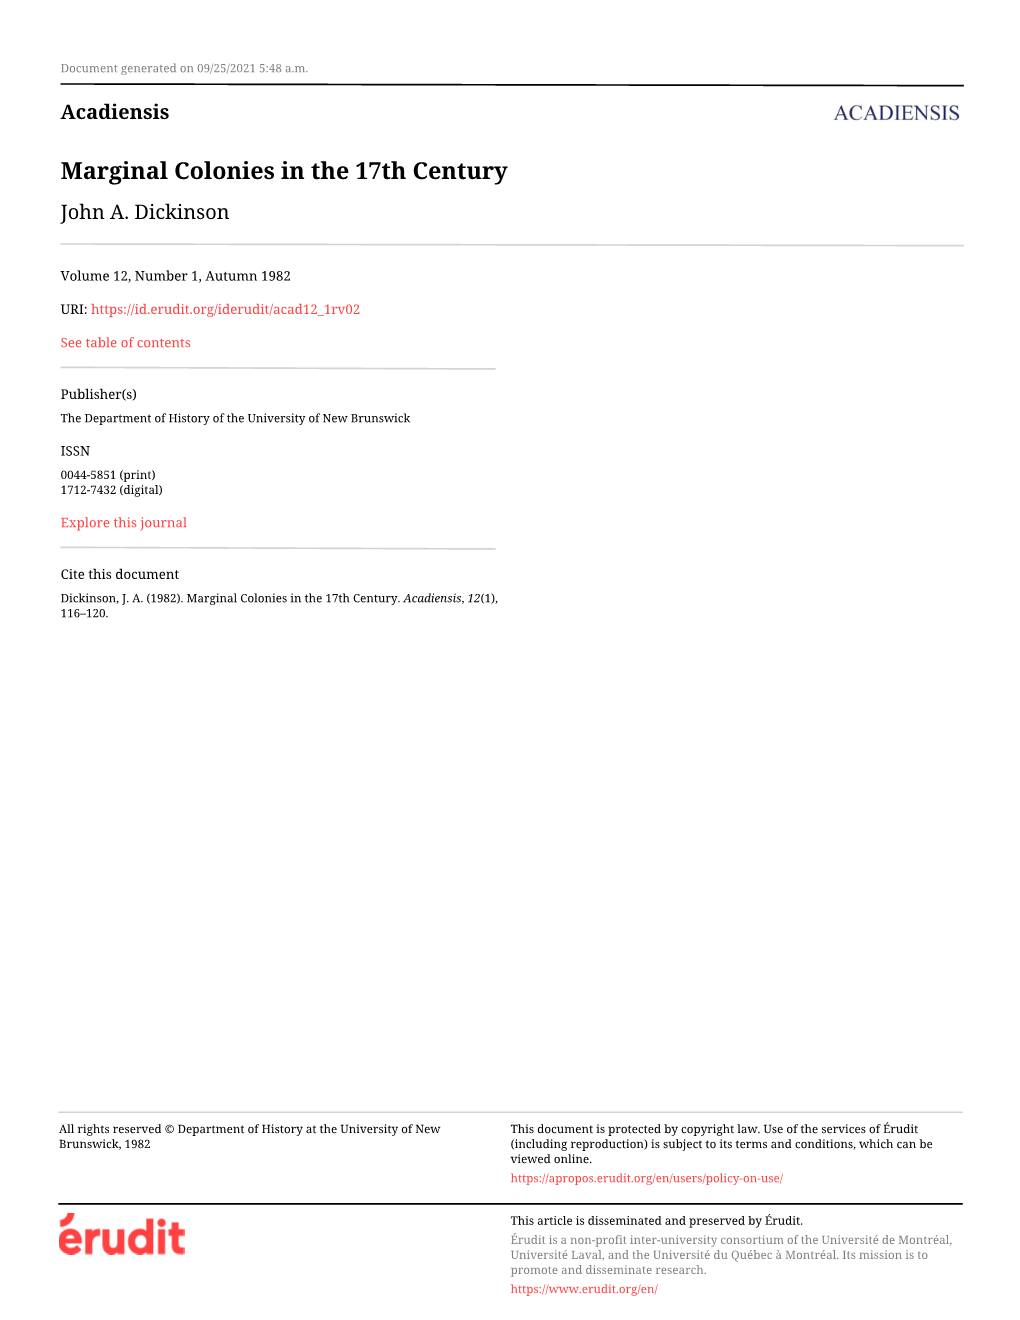 Marginal Colonies in the 17Th Century John A